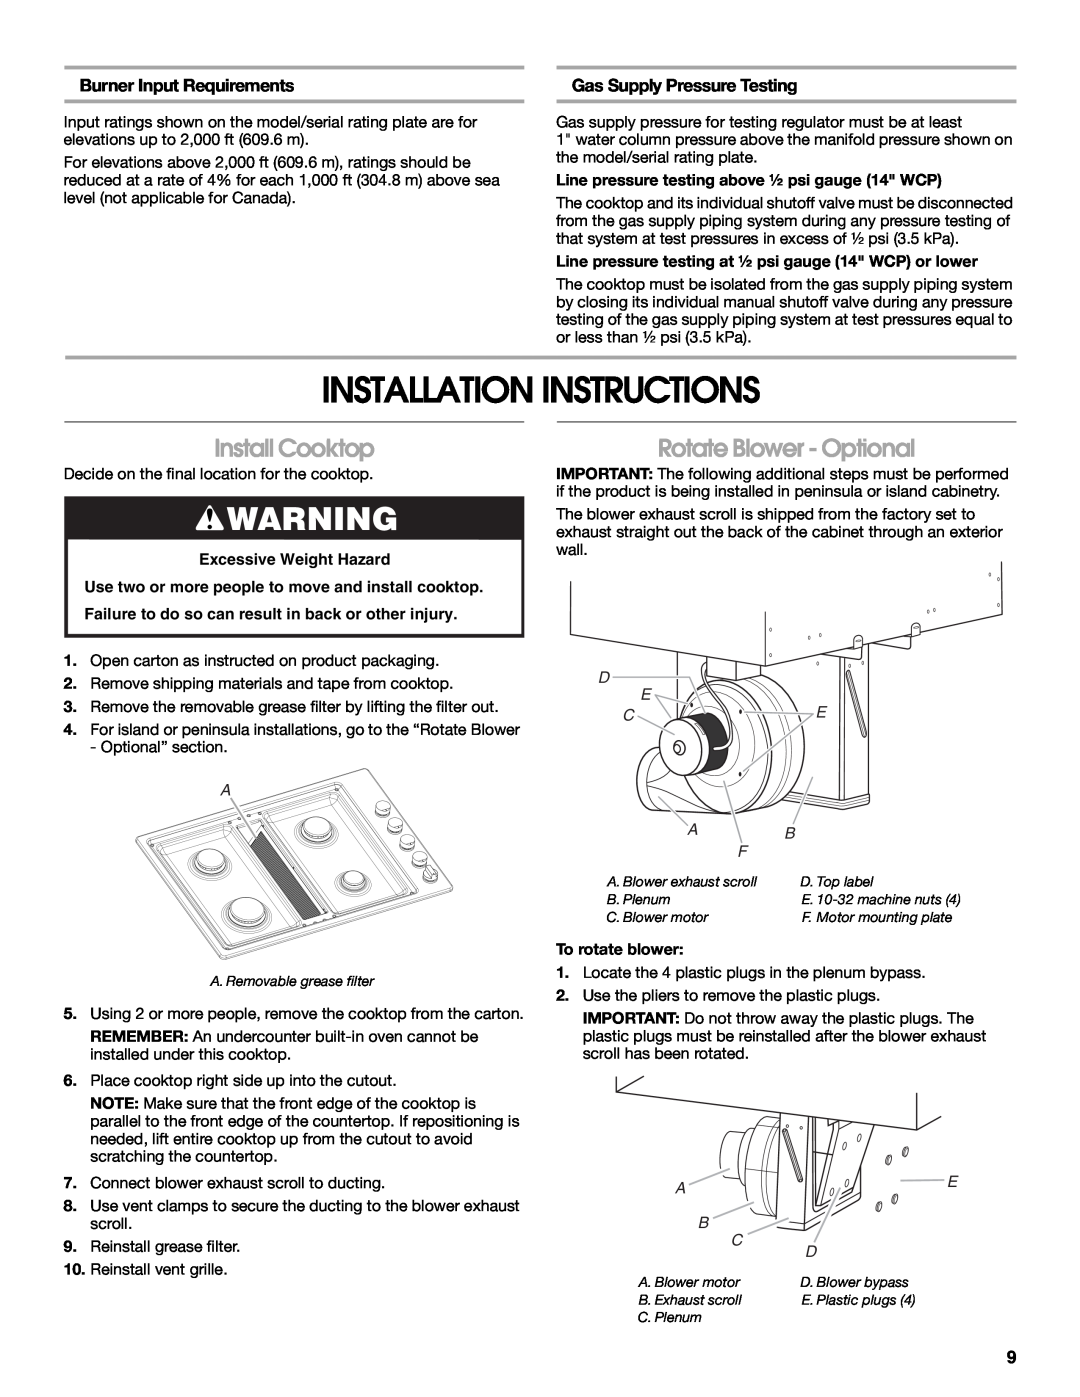 Jenn-Air W10574732A Installation Instructions, Install Cooktop, Rotate Blower - Optional, Burner Input Requirements 